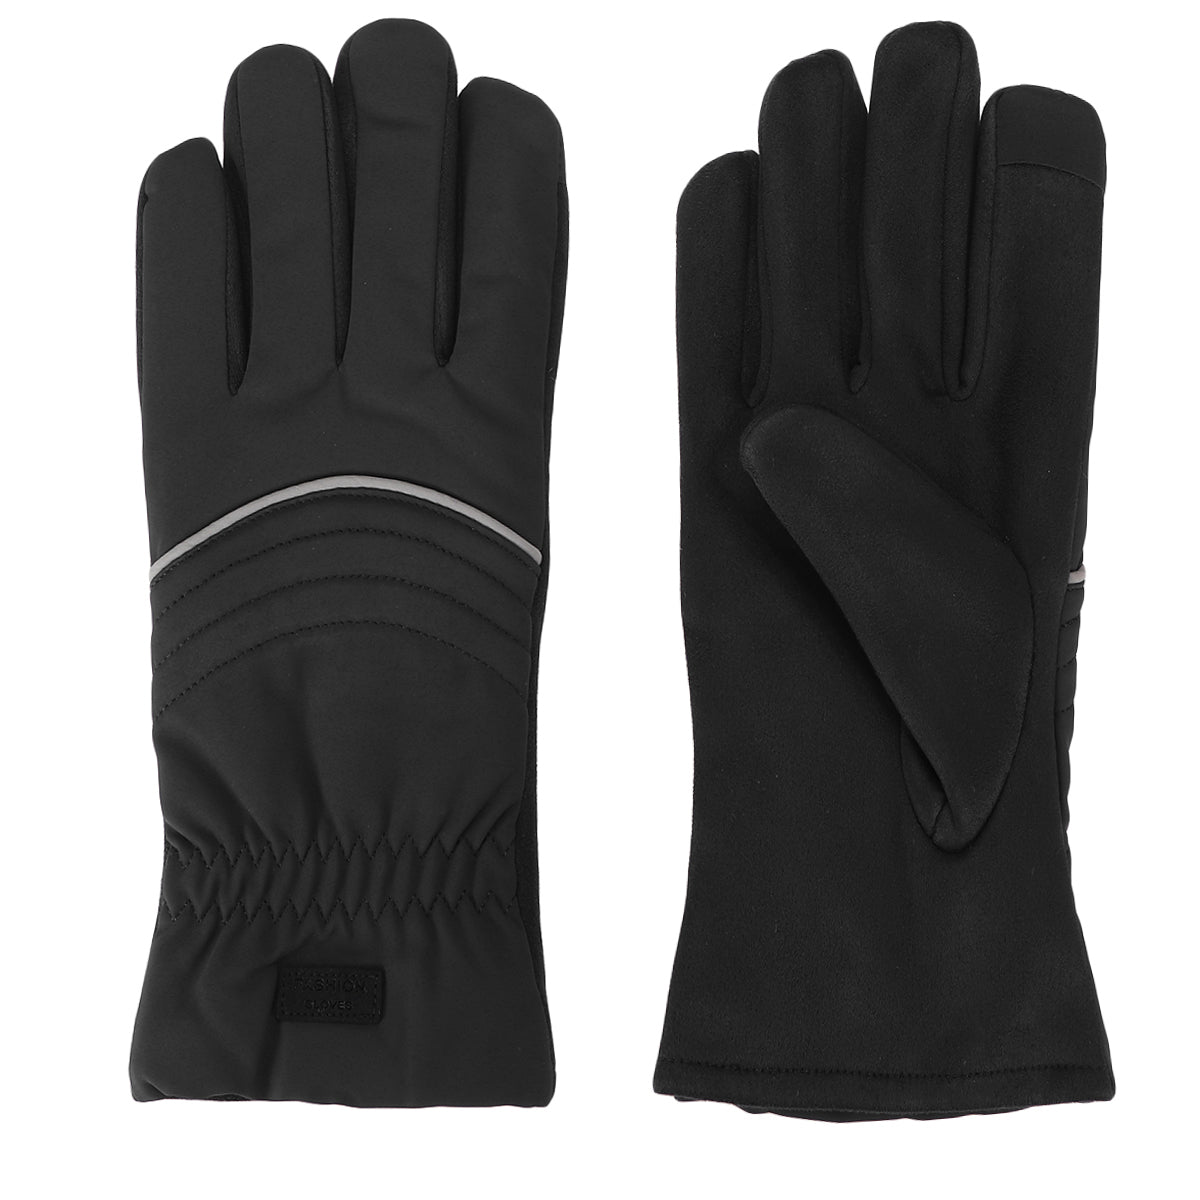 -15° Winter Warm Thermal Gloves Ski Snow Snowboard Cycling Touch Screen Waterproof - Auto GoShop